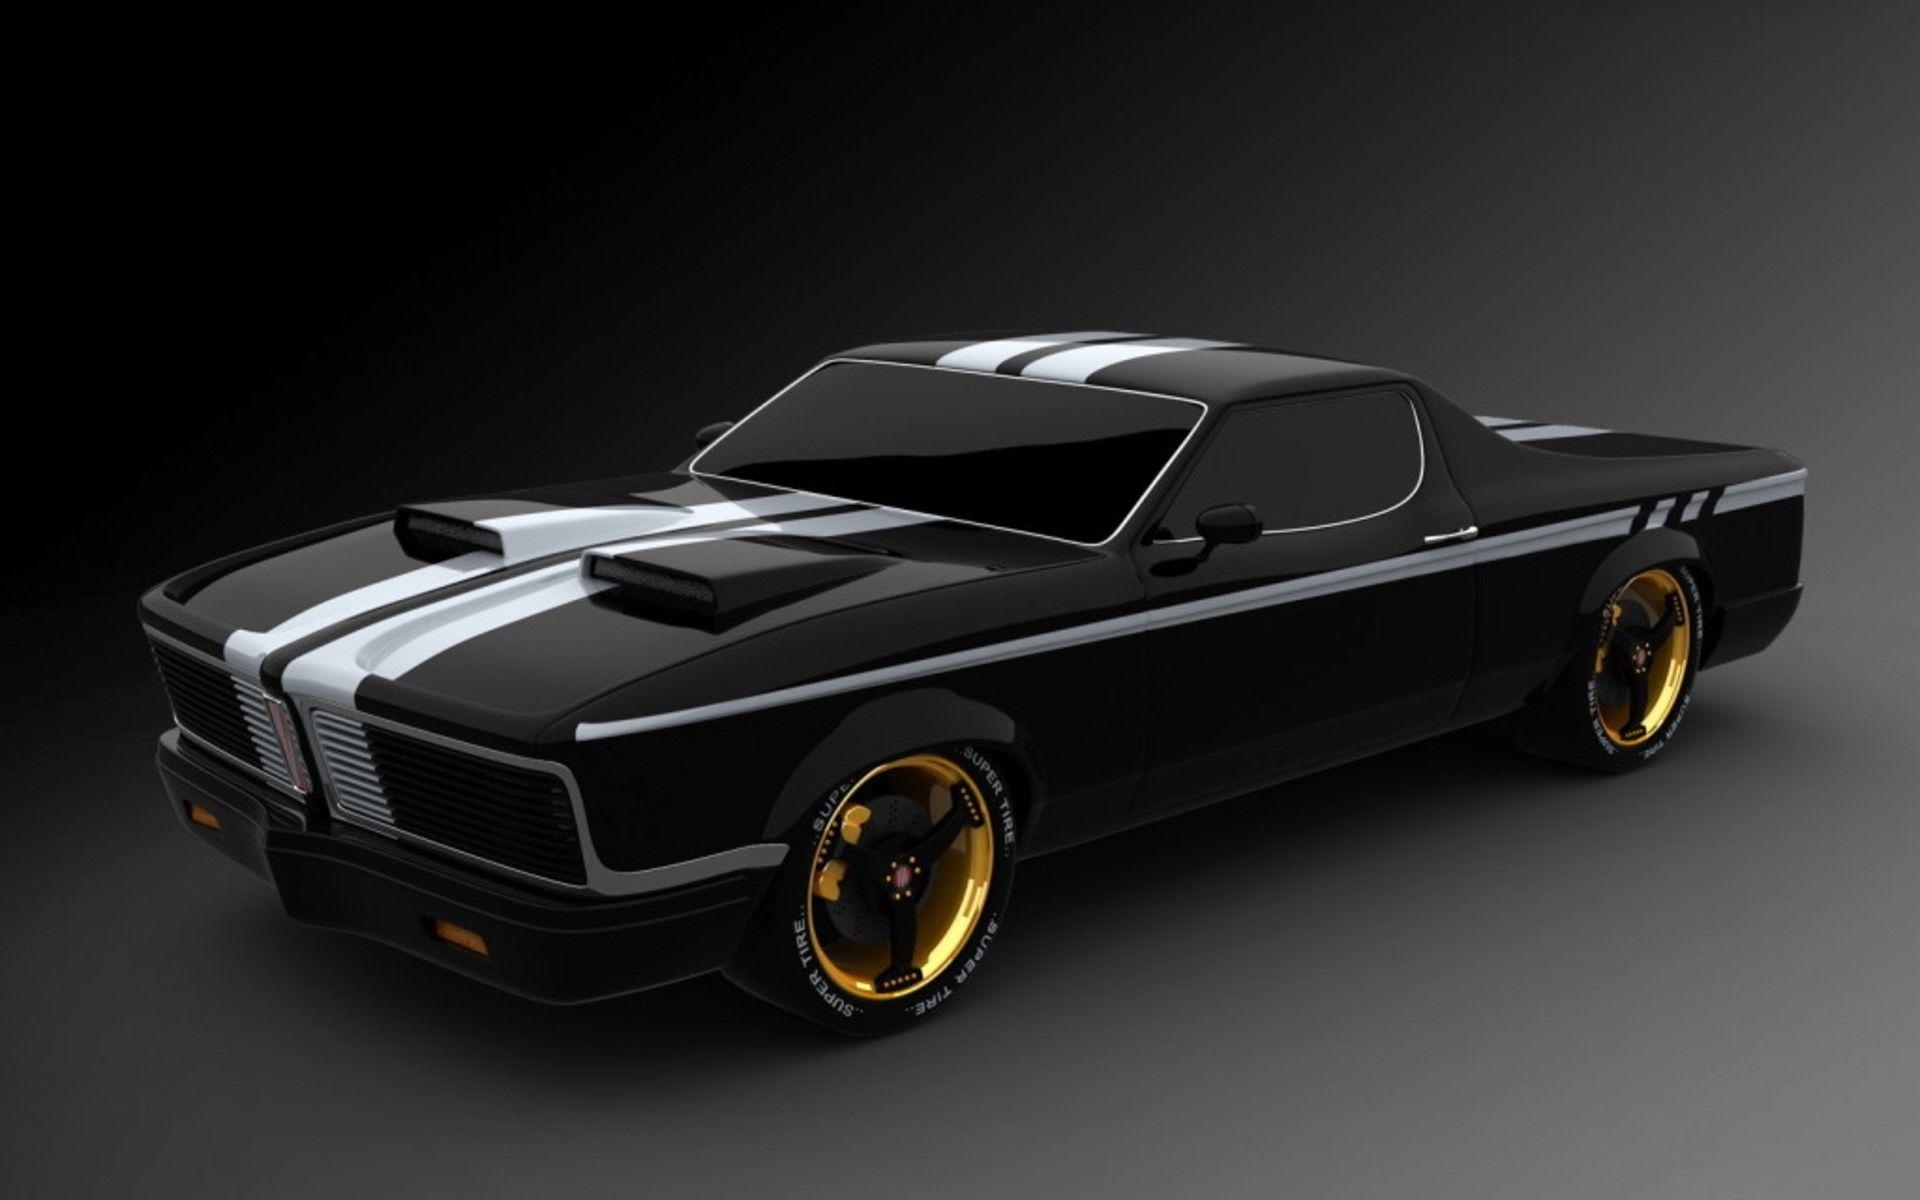 Muscle Cars Image Wallpaper HD, Wallpaper, Muscle Cars Image